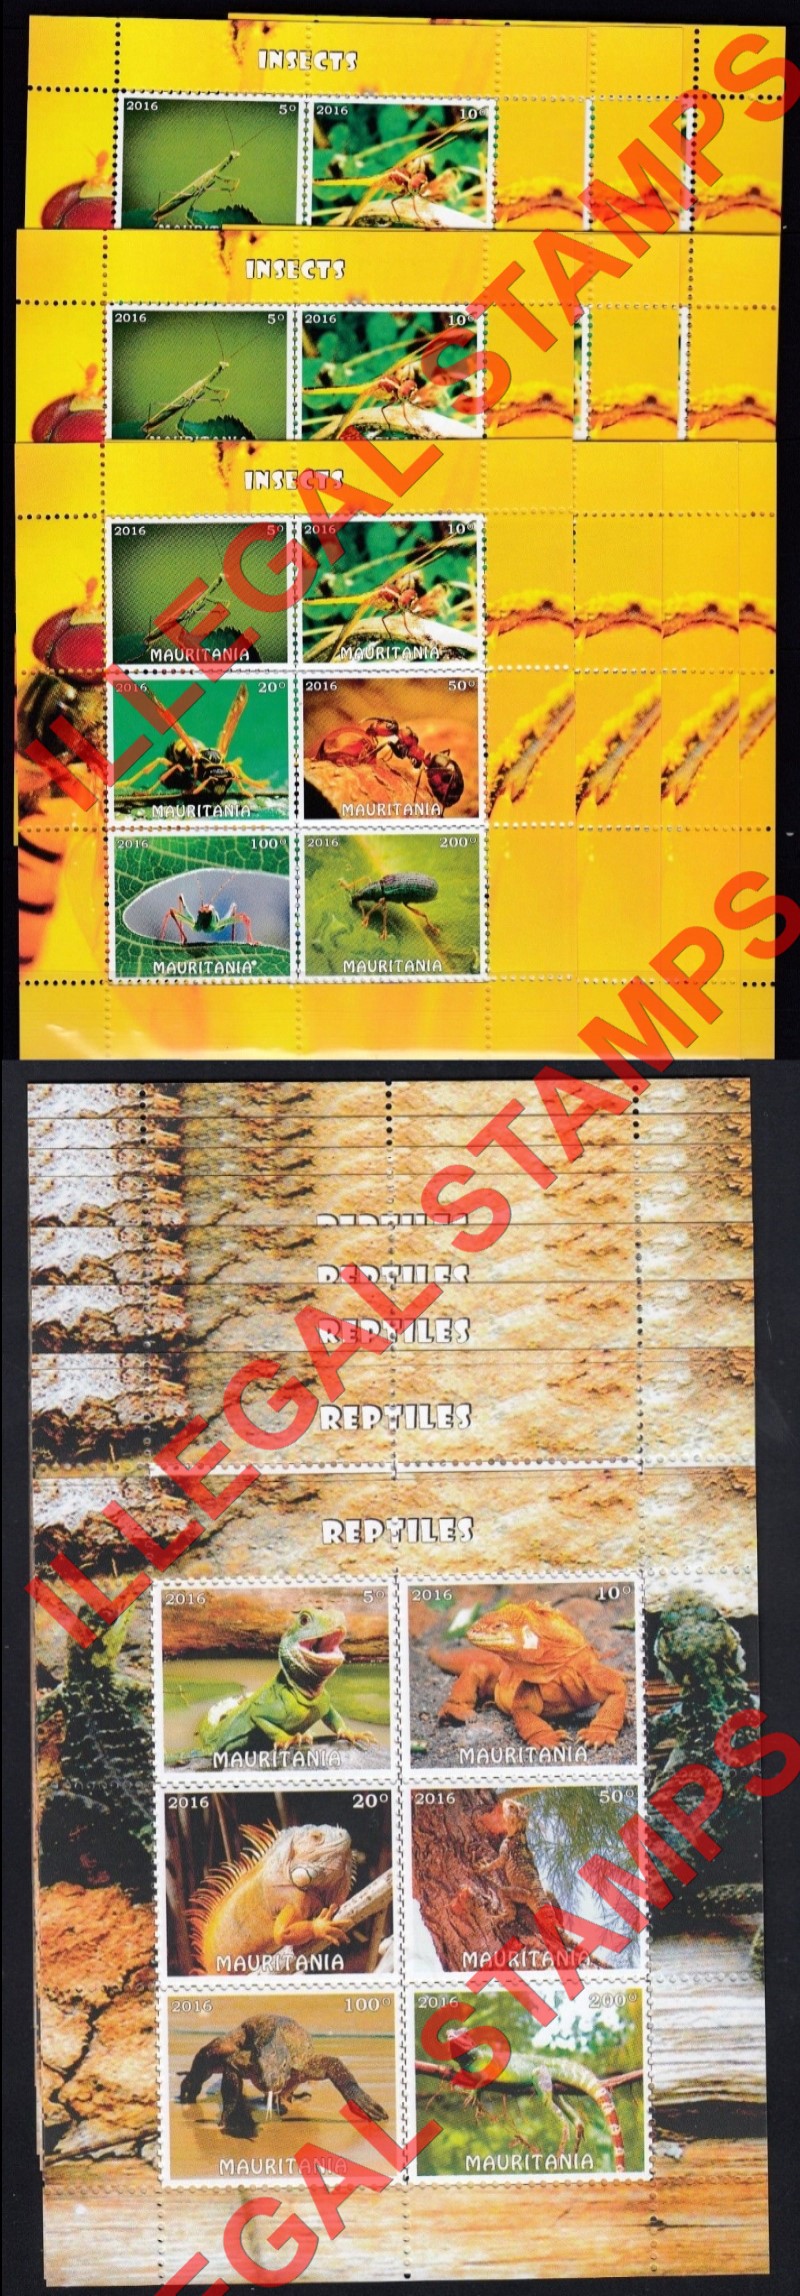 MAURITANIA 2016 Examples of Bulk Sales of Counterfeit Illegal Stamp Souvenir Sheets of 6 Dating 2016